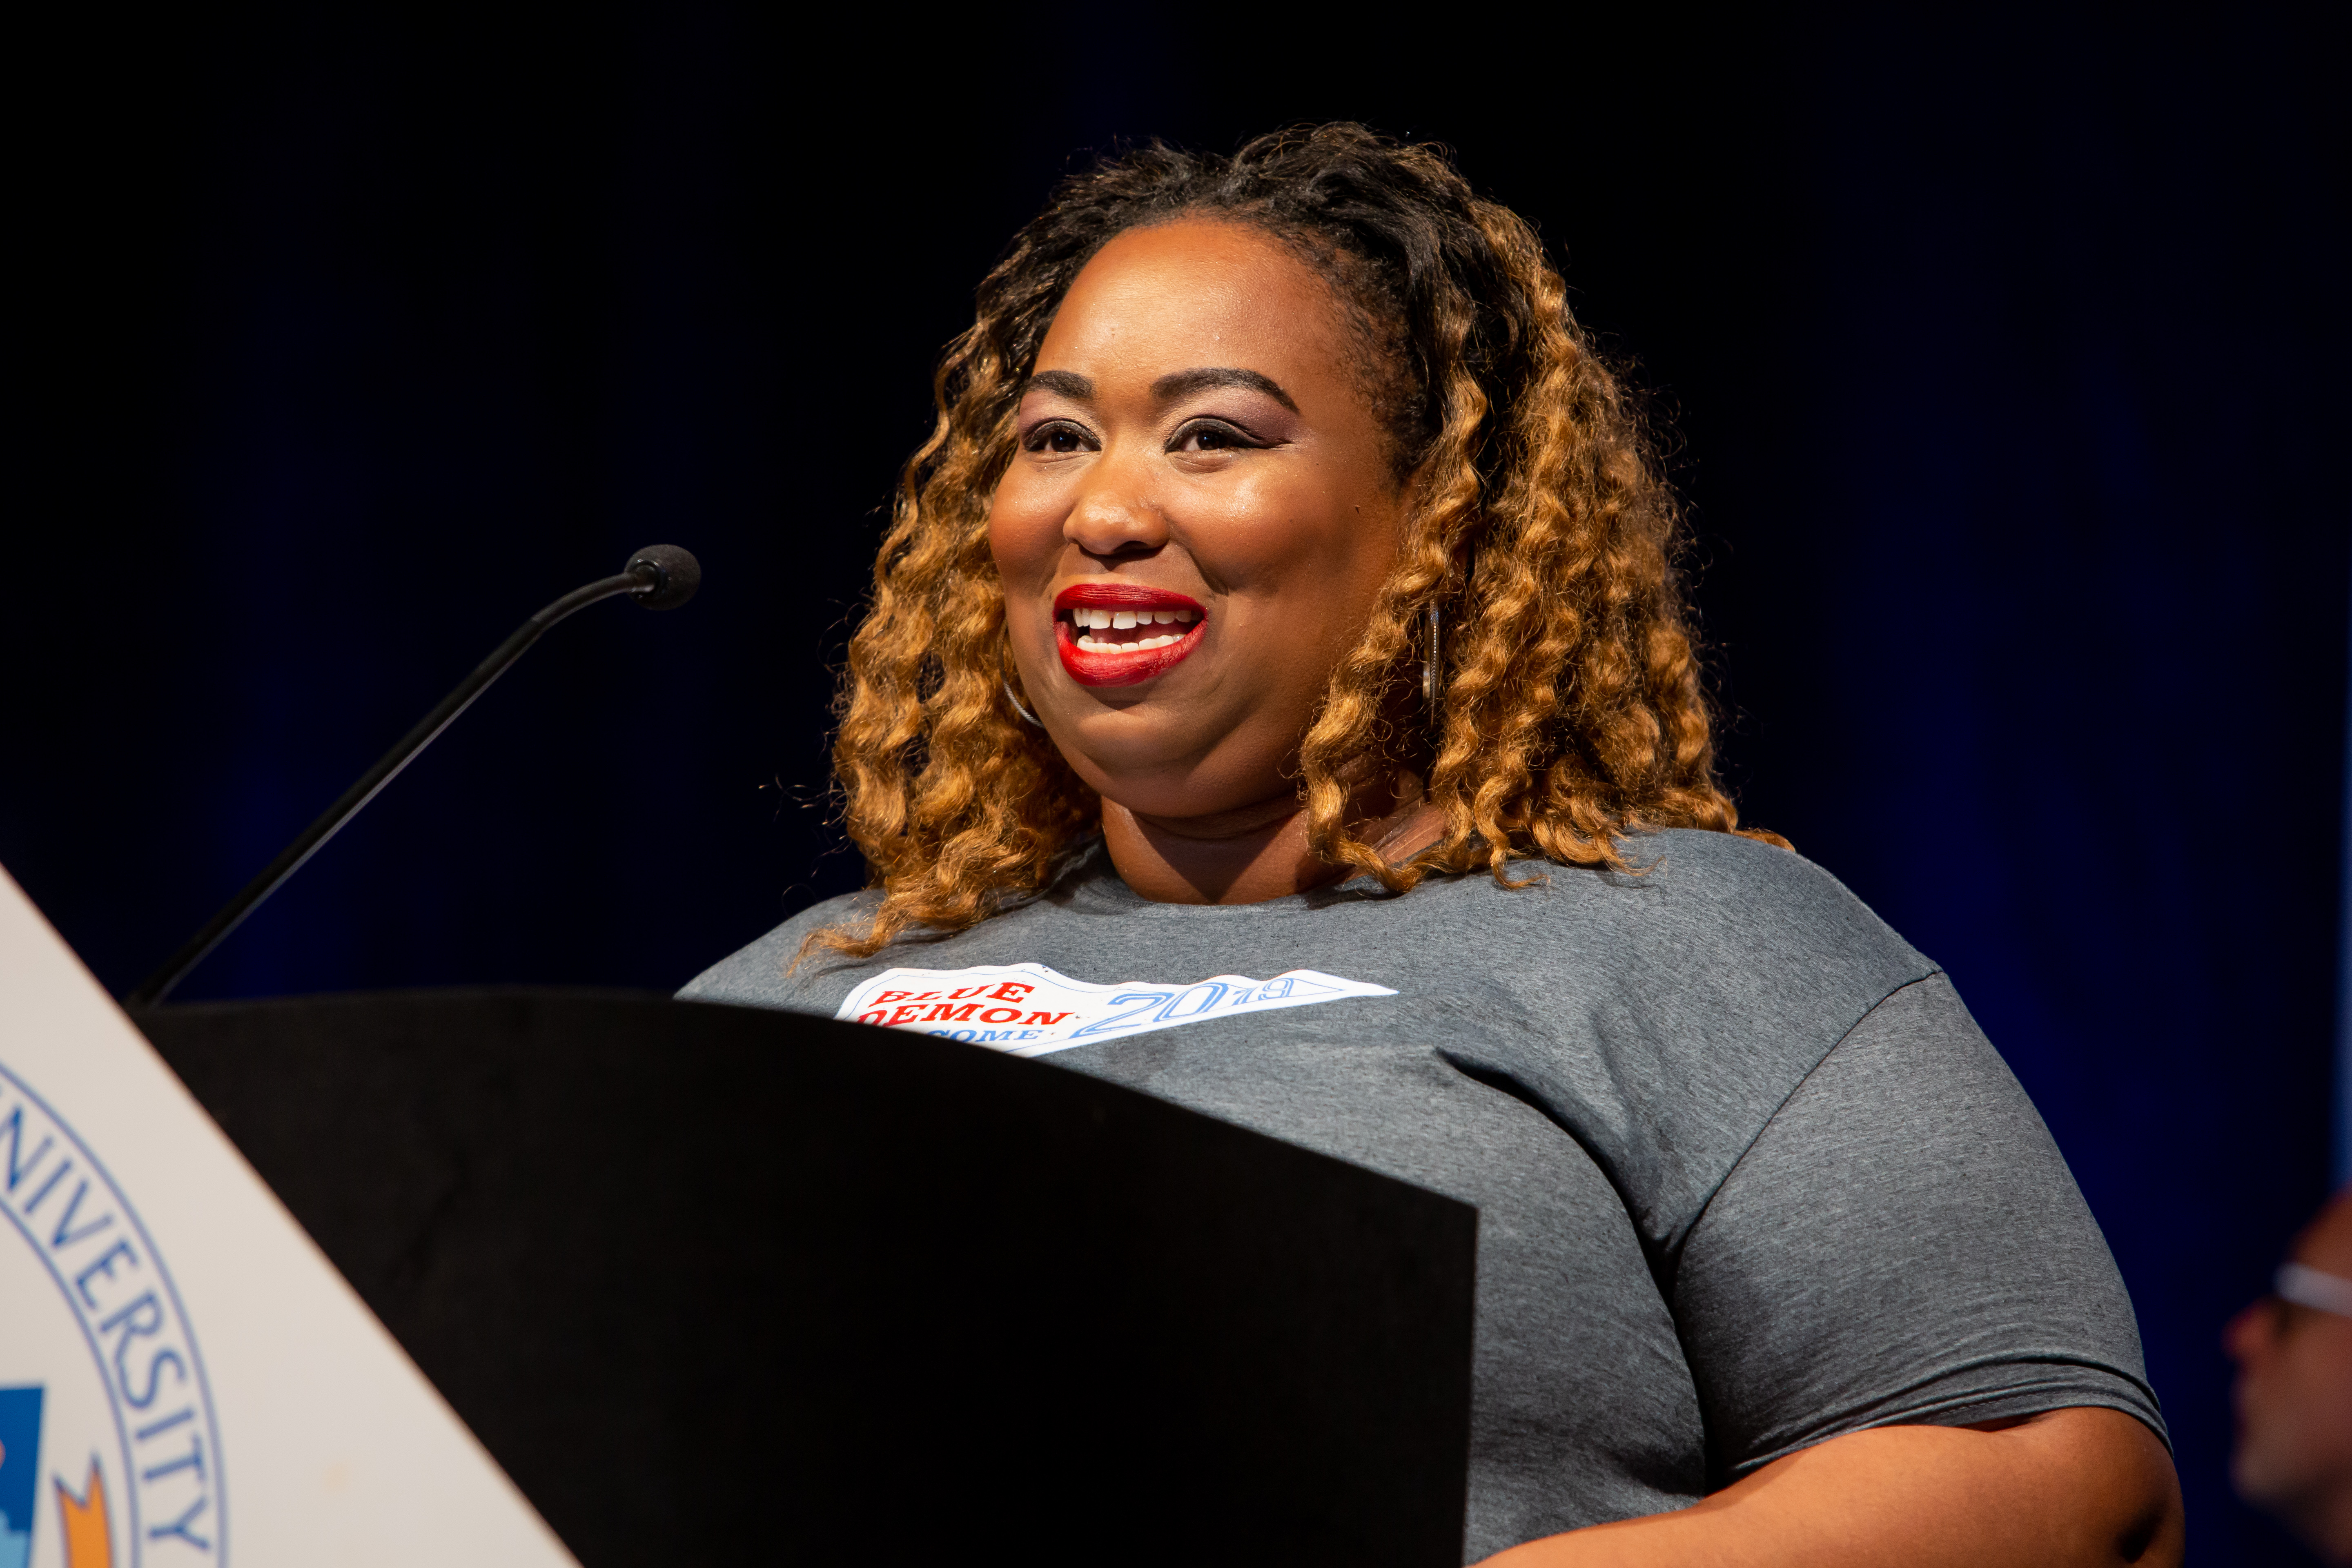 Quiana Stone, associate director for selection and training in Residential Education, sings a rousing rendition of the National Anthem at the beginning of the event. (DePaul University/Randall Spriggs)